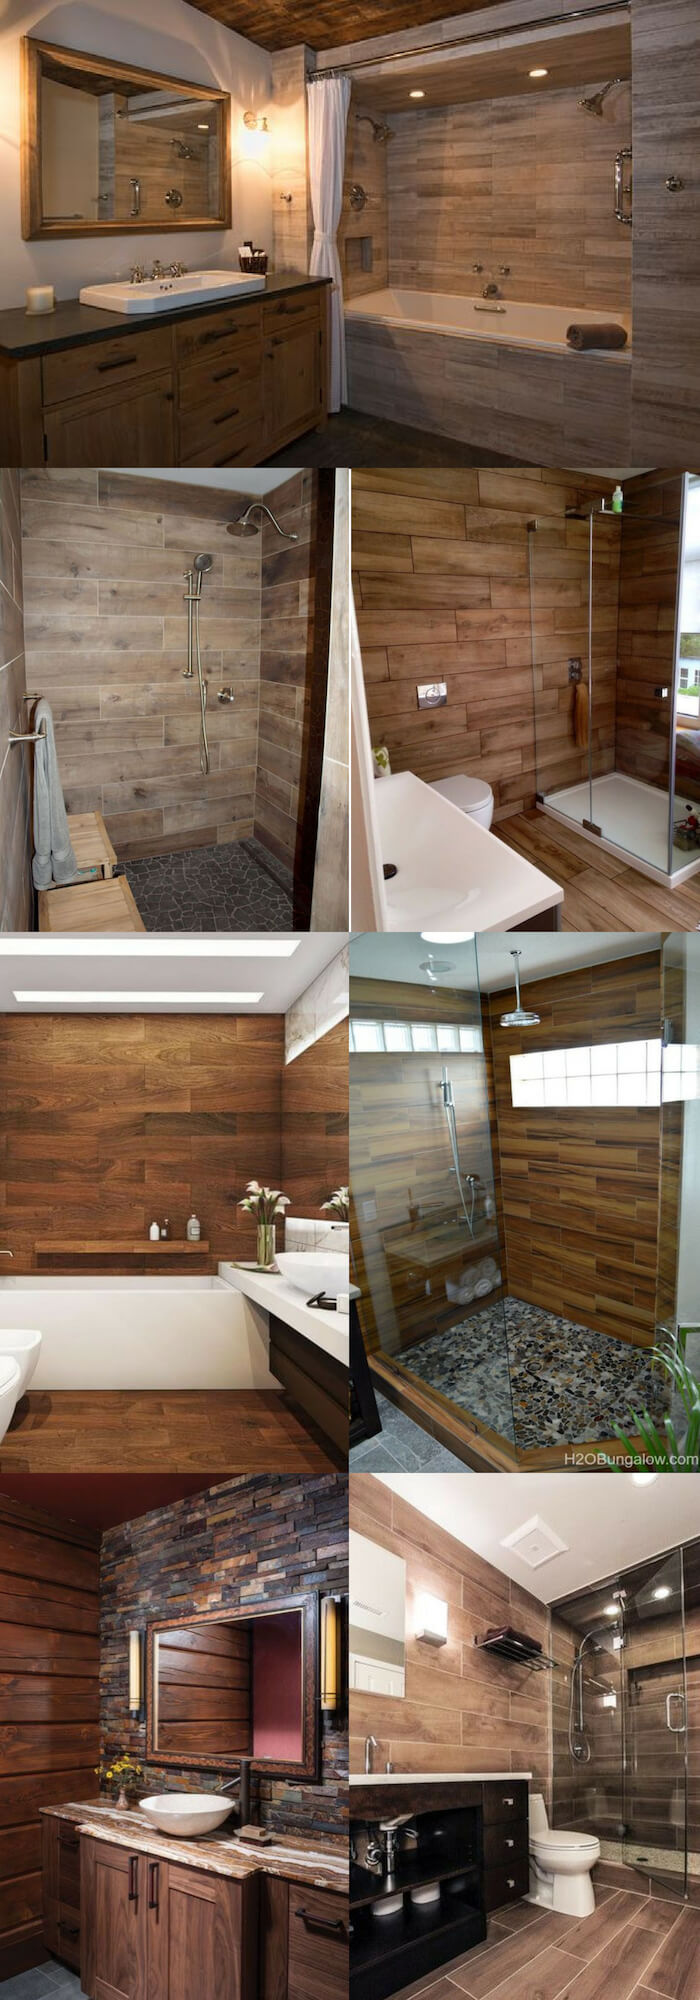 Wood wall | Unique Wall Tile Ideas for Bathroom Design